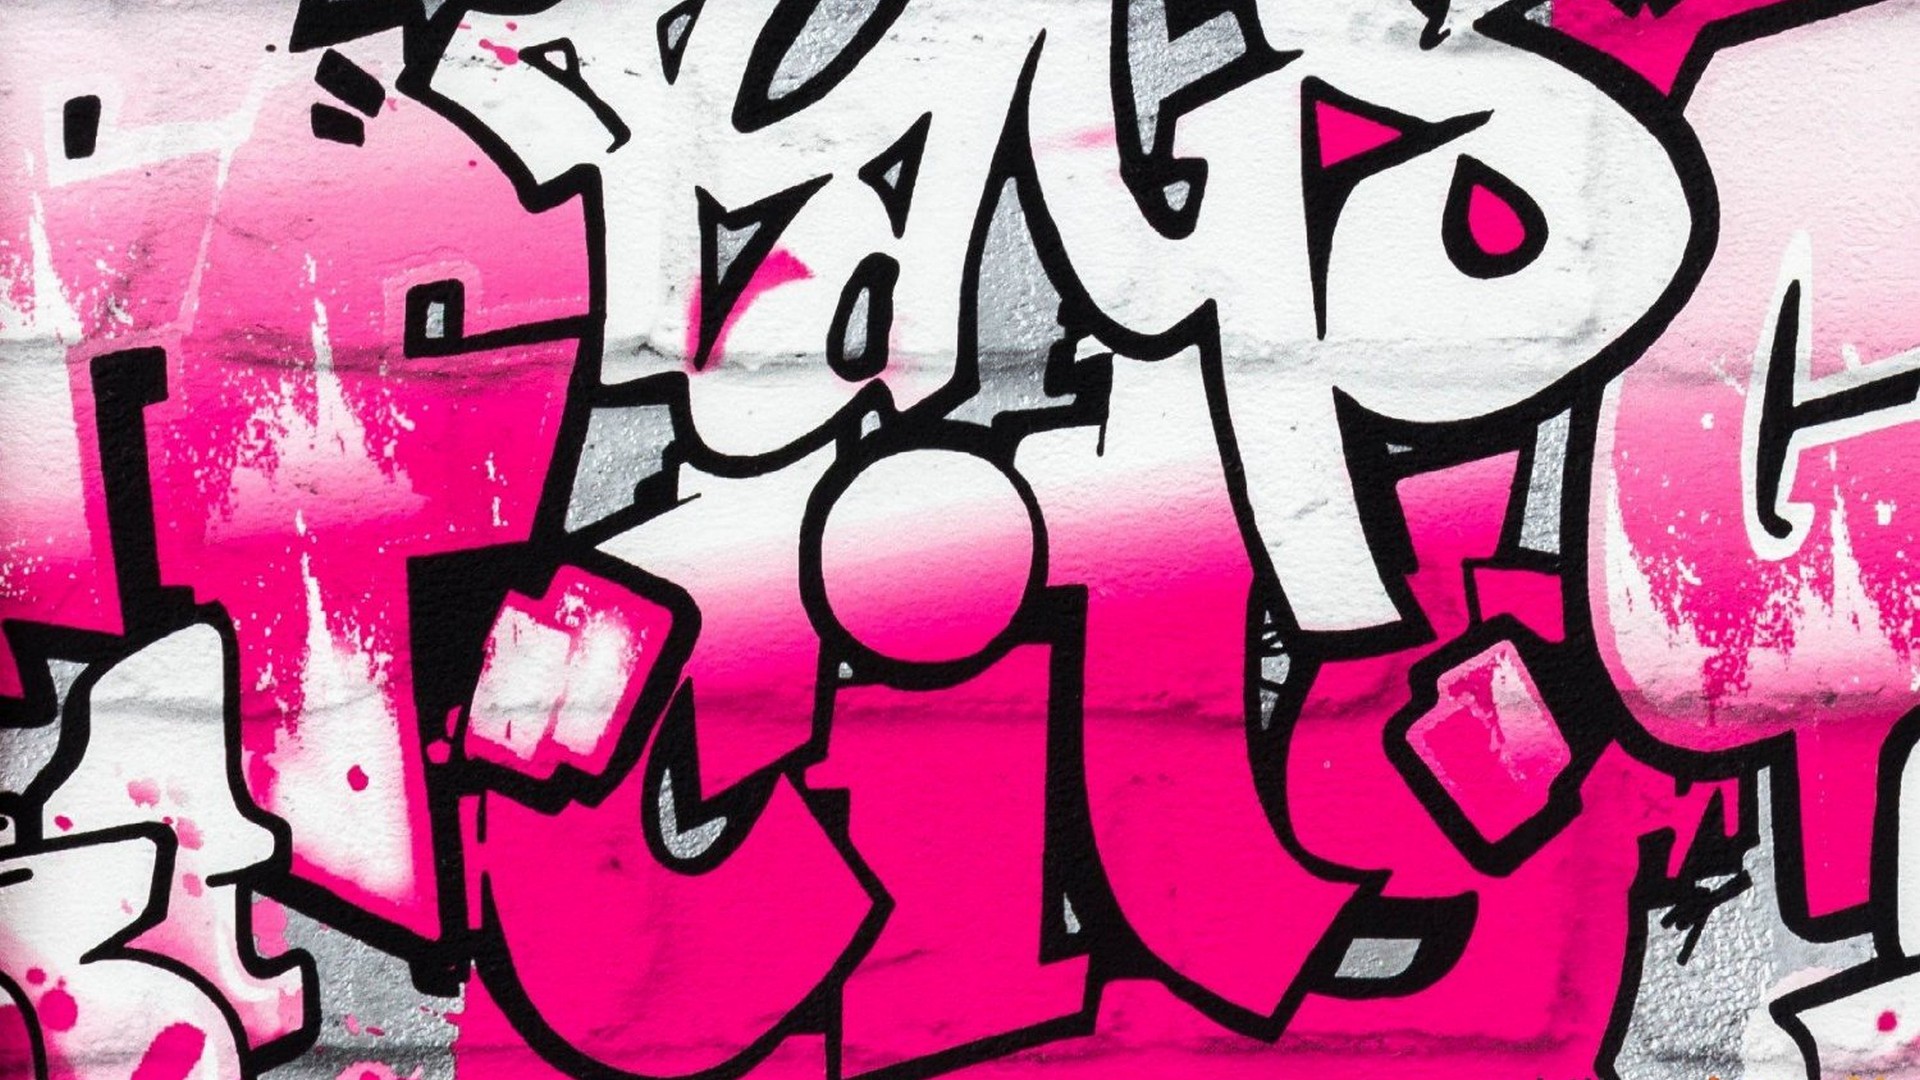 Graffiti Font Wallpaper For Desktop with image resolution 1920x1080 pixel. You can use this wallpaper as background for your desktop Computer Screensavers, Android or iPhone smartphones